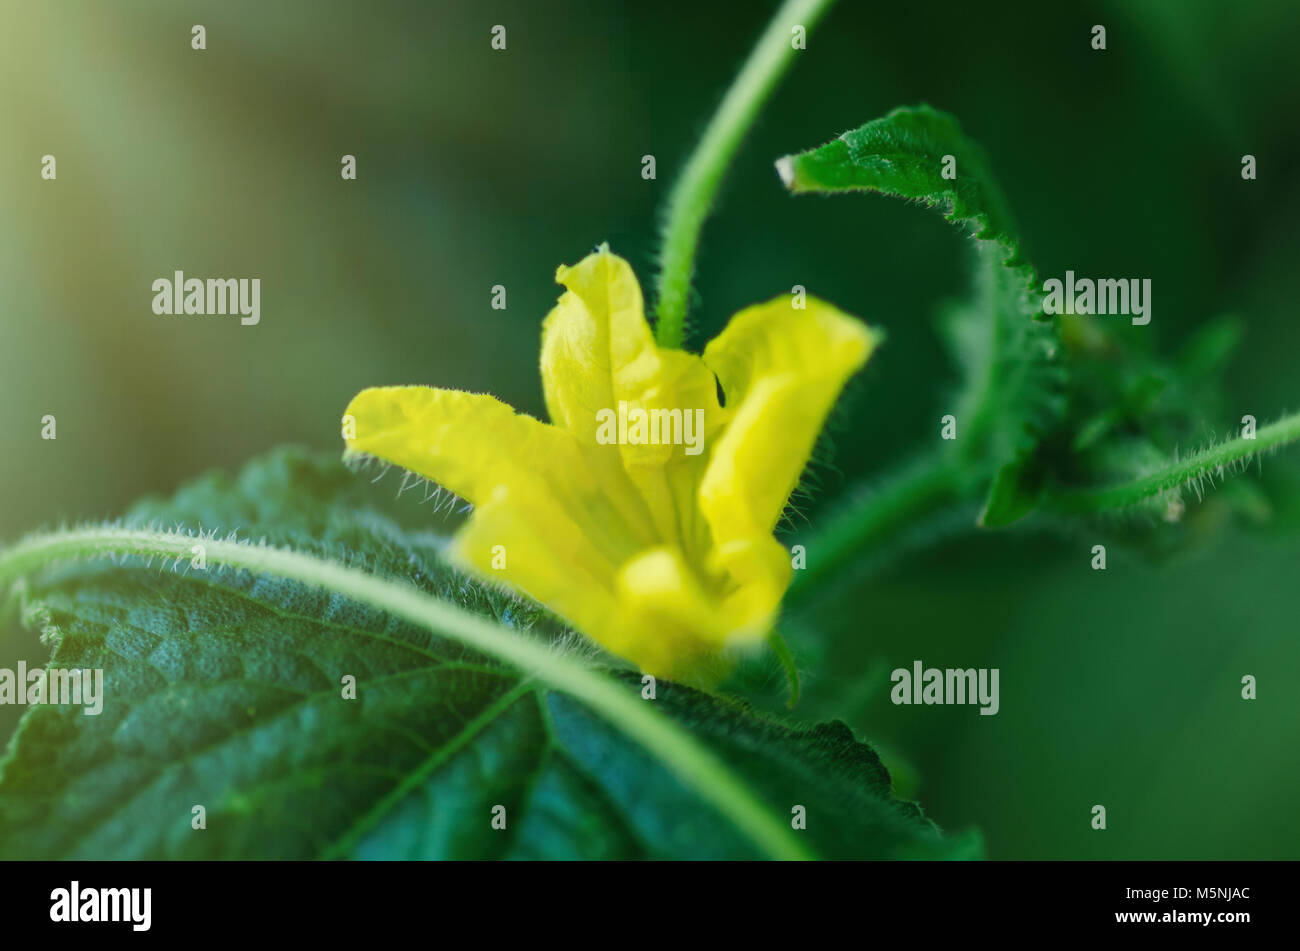 A small cucumber with a yellow flower. The first crop in the garden. Stock Photo